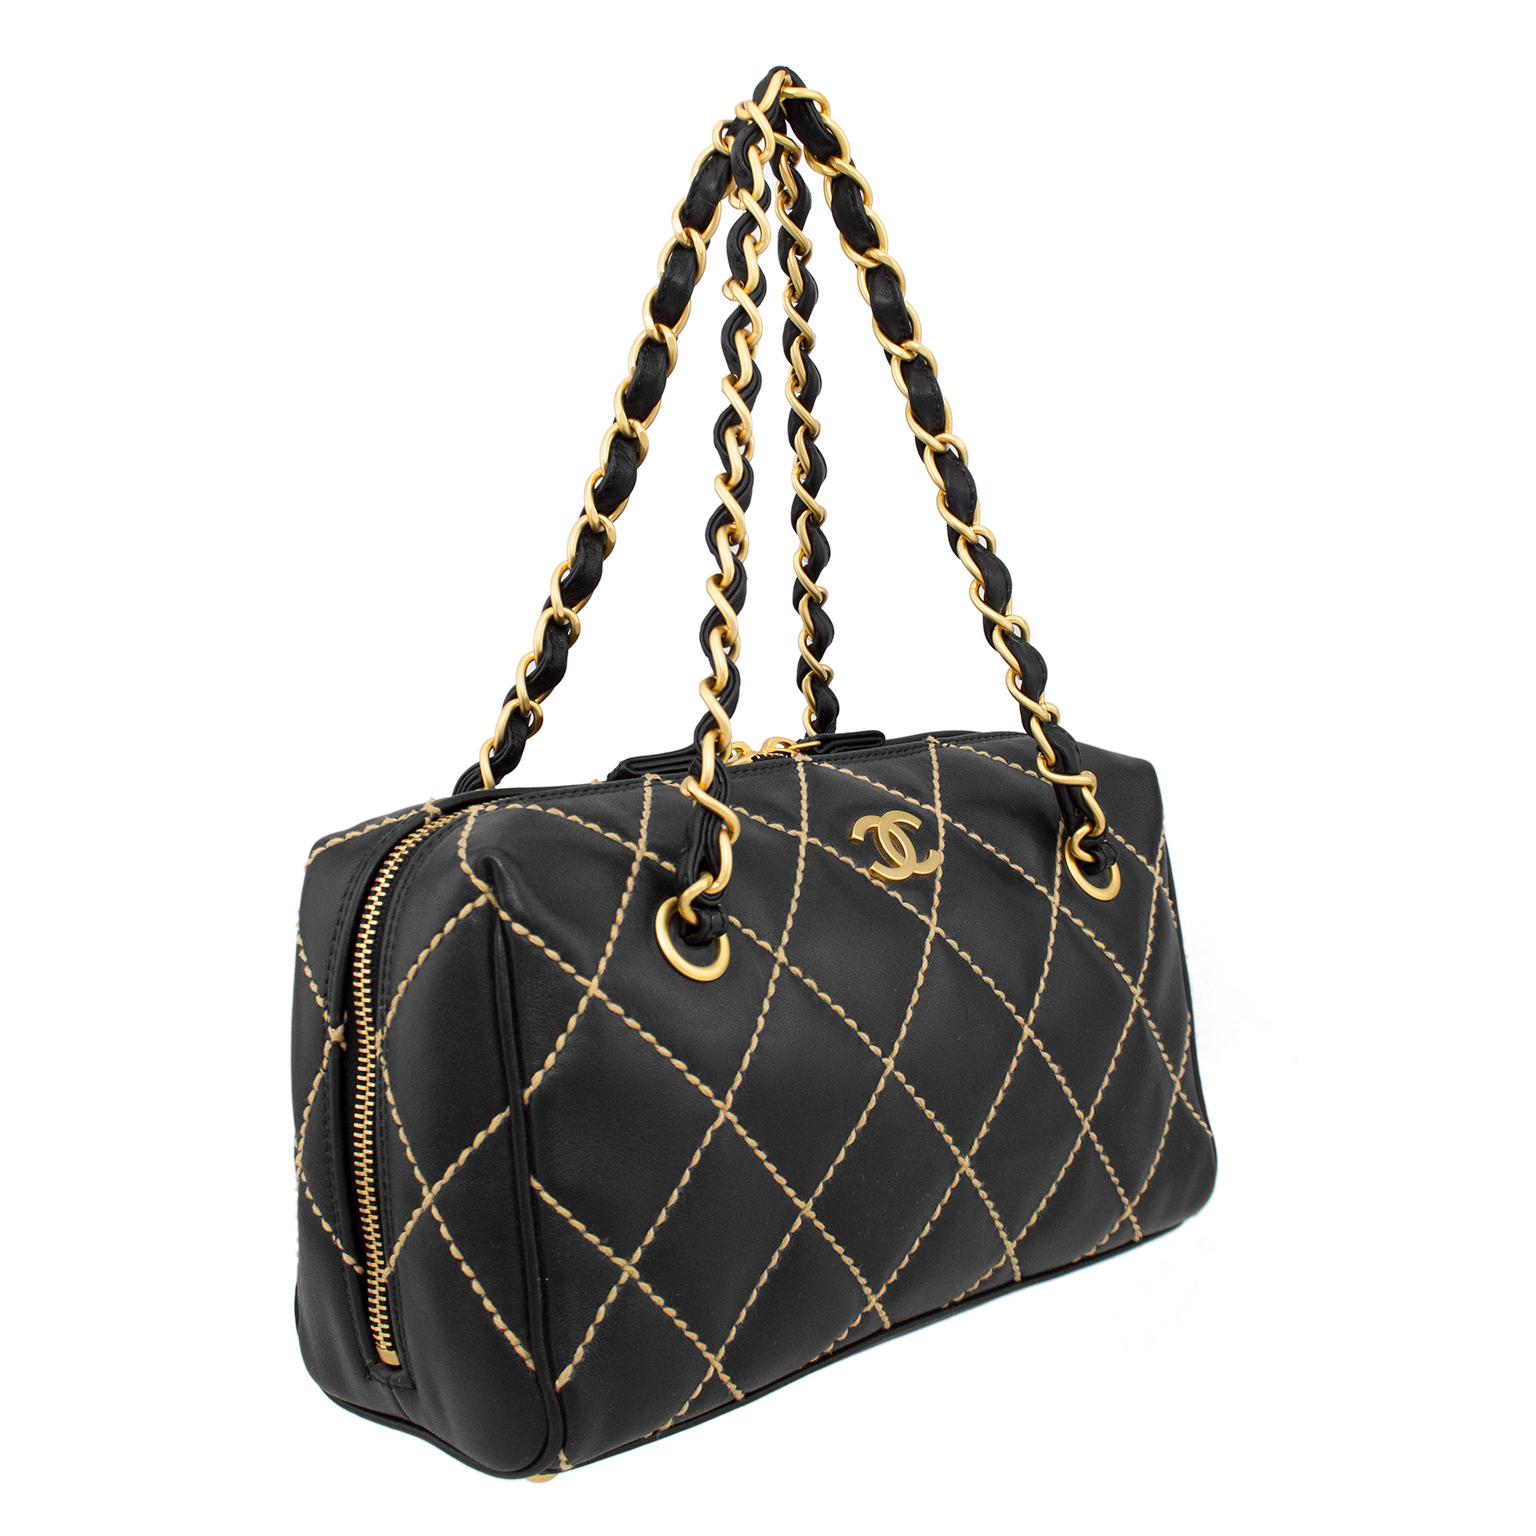 Designed in 2003 by Karl Lagerfeld for Chanel, this small Surpique bowler bag would be a wonderful addition to your collection. Supple black leather with beige quilted top stitching. Small gold tone metal interlocking cc logo. Gold chain and black